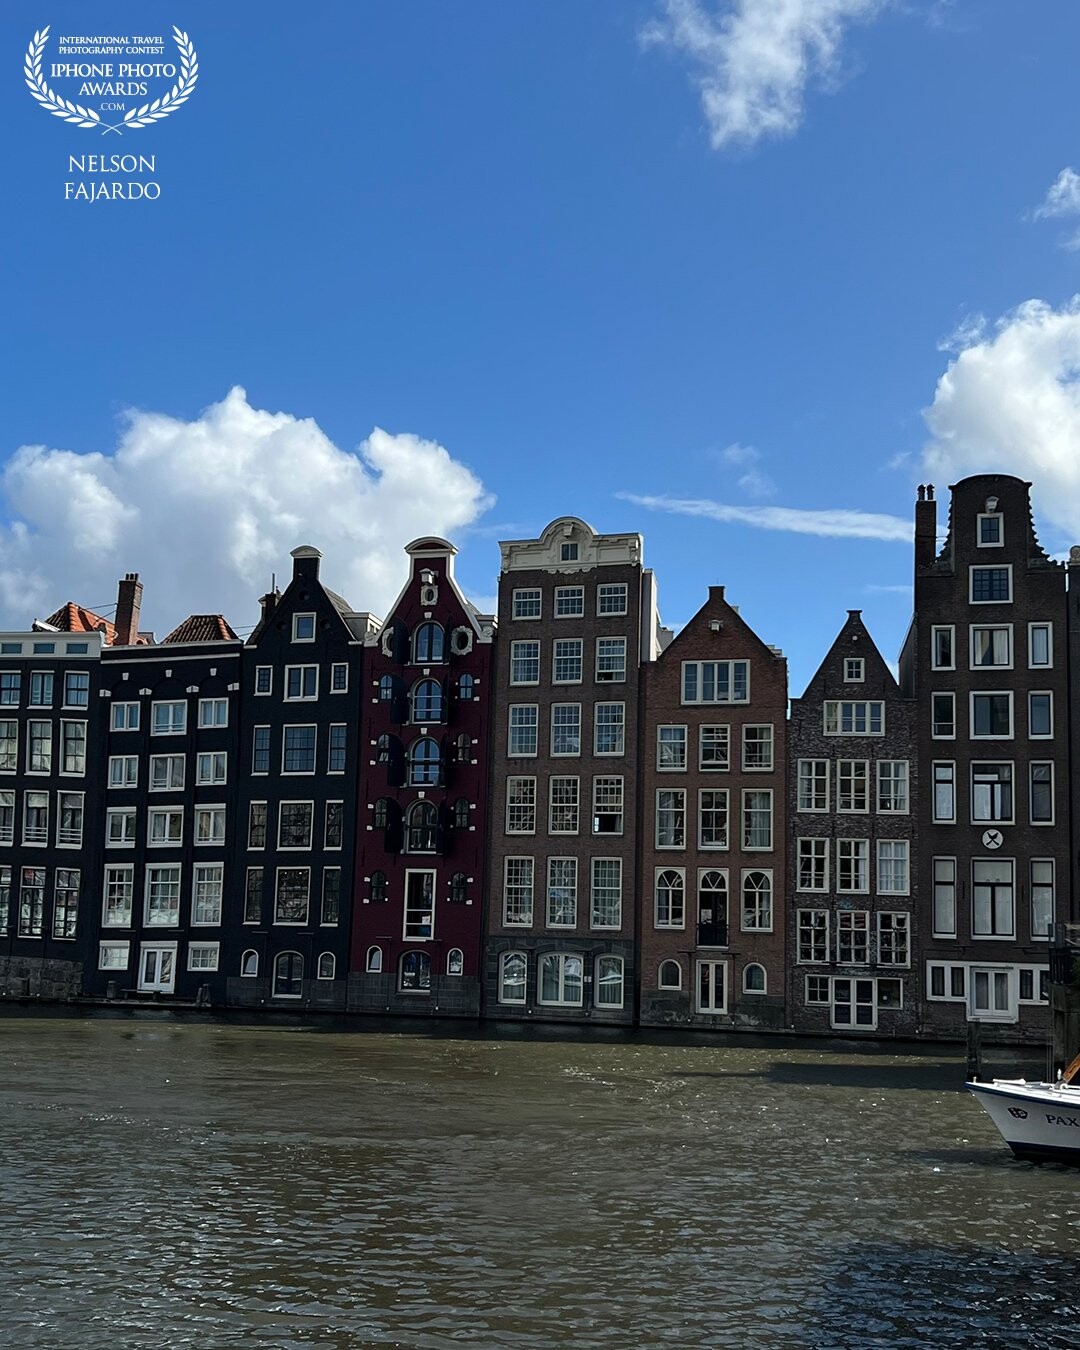 This river side buildings are most known as the dancing lady buildings, they are seen on popular photos in travel magazines, souvenir products and post cards.